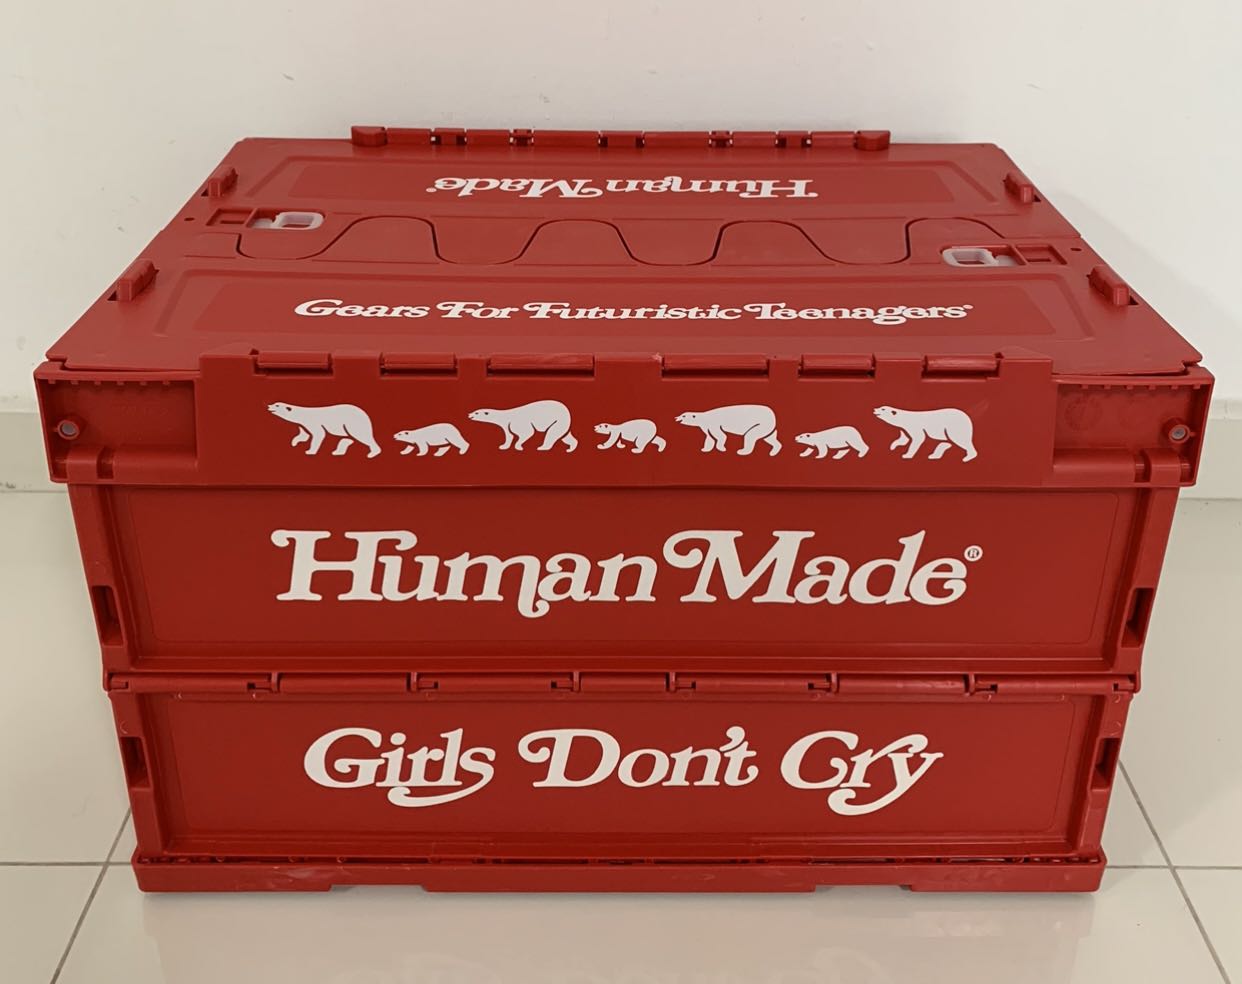 Human made x Girls don’t cry 50L container/crate